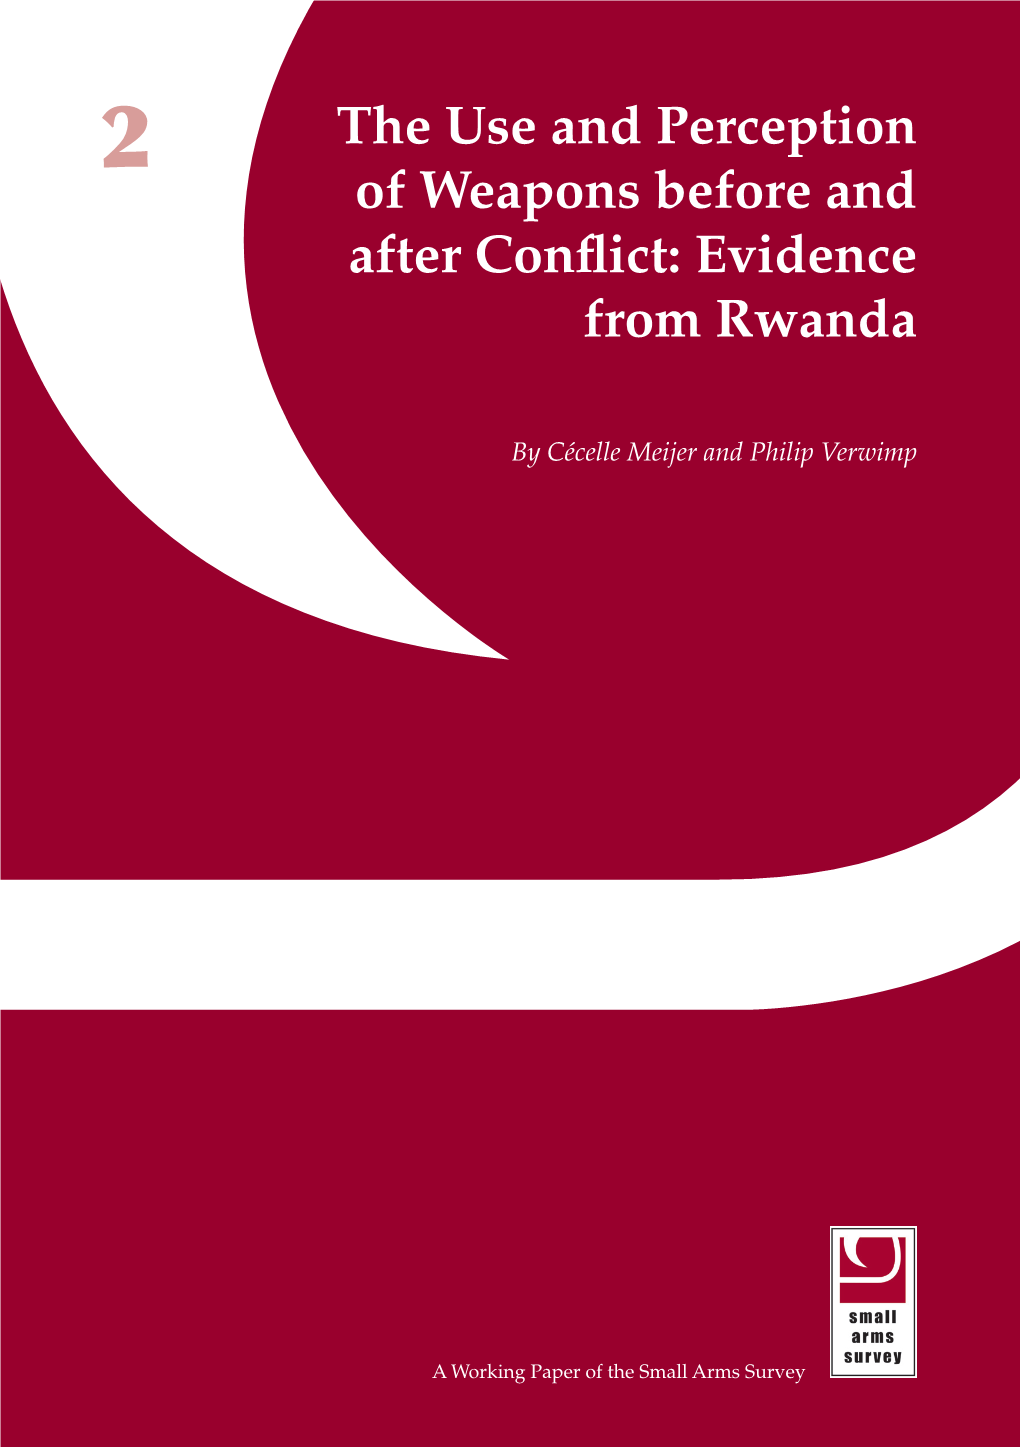 The Use and Perception of Weapons Before and After Conflict: Evidence from Rwanda